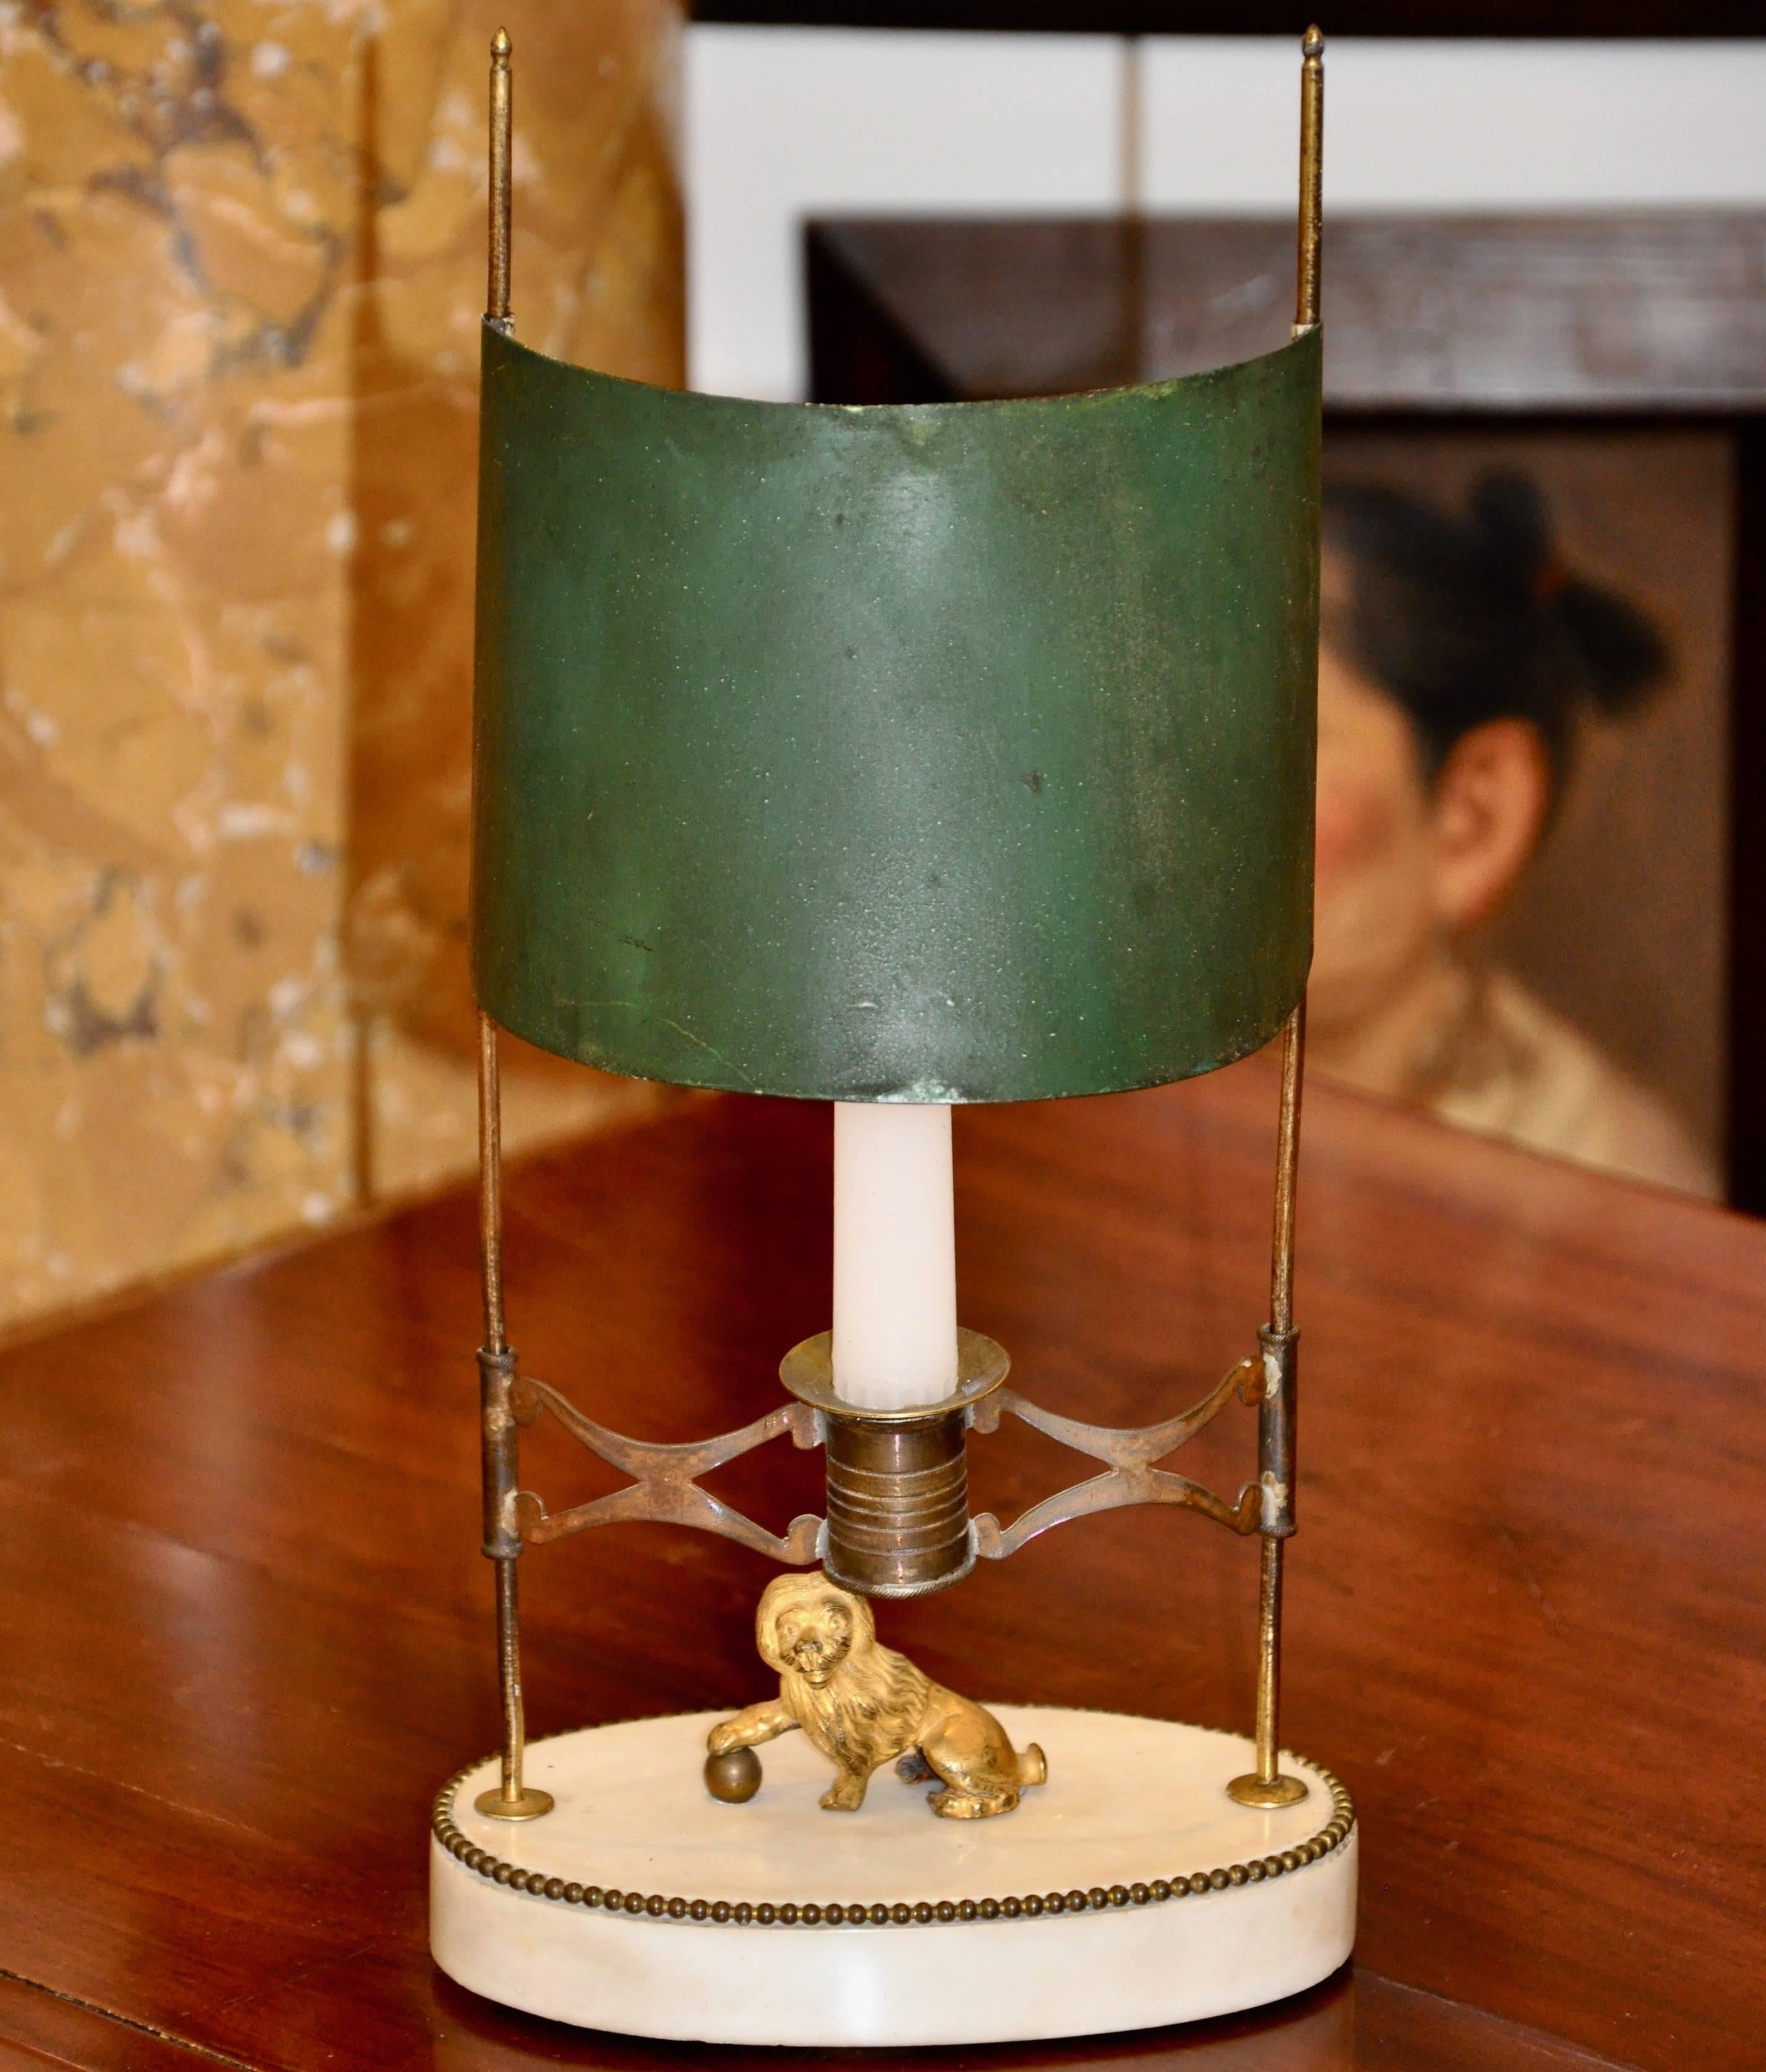 Period gilt bronze marble and tole Bouillotte or reading lamp

--Original Green Tole Adjustable Shade
--Marble Base
--Adjustable Candle Holder
--Naive Lion Adornment

See: 